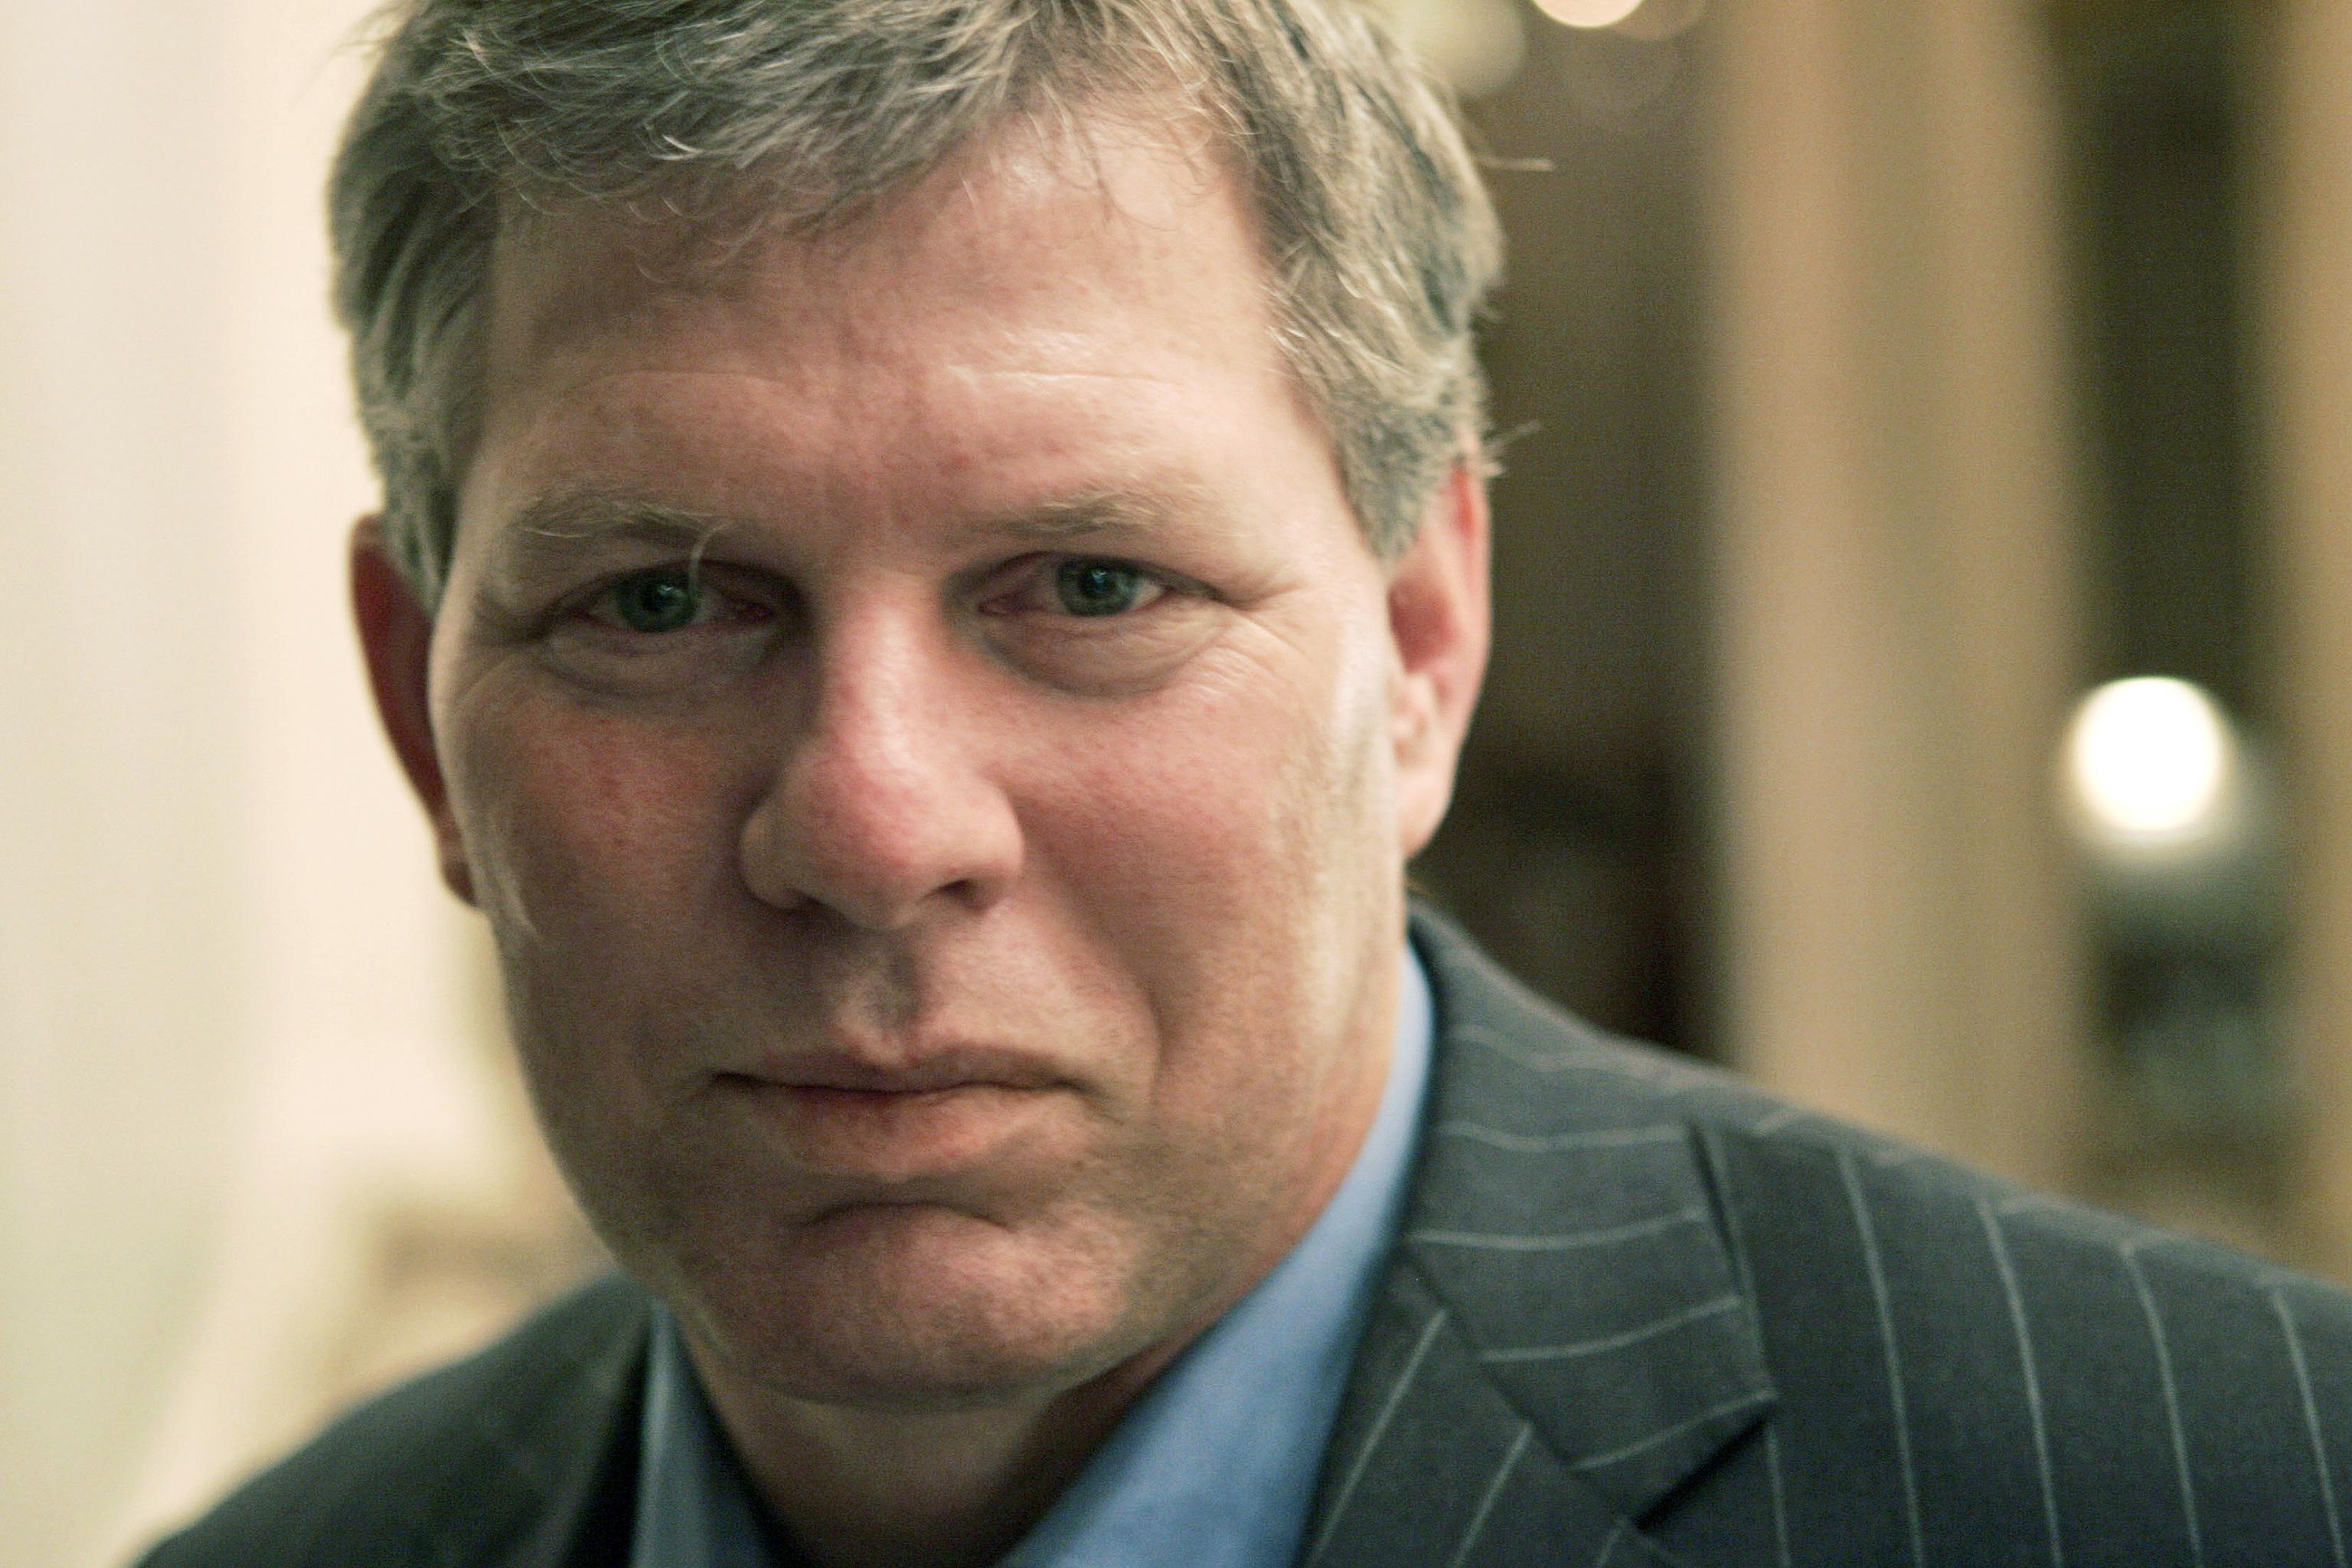 Lenny Dykstra sues former teammate Ron Darling over claims of